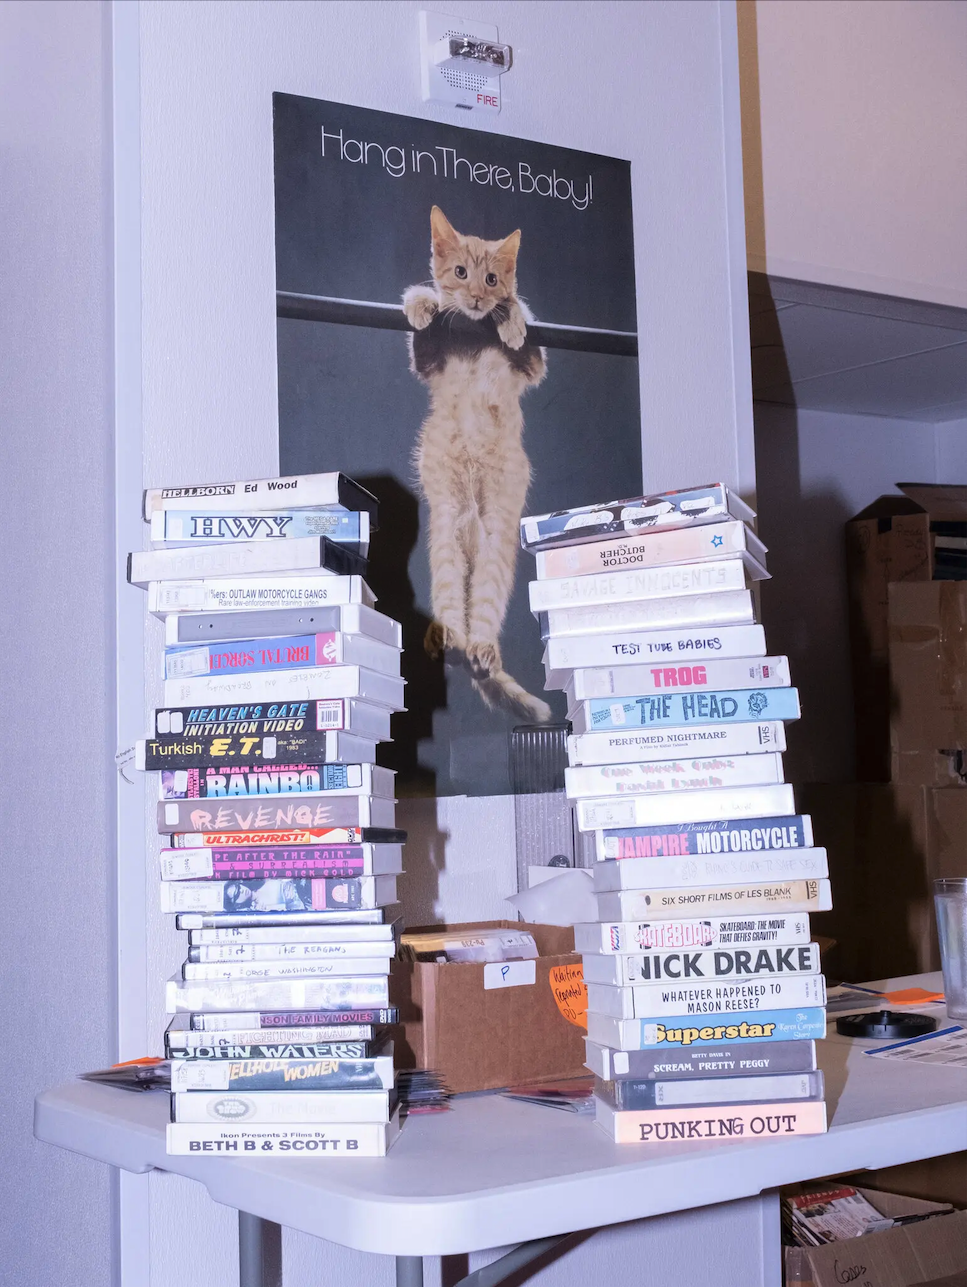 A &quot;Hang in There, Baby&quot; poster showing a kitten hanging on to a pole appears on a wall behind two stacks of VHS videotapes on a table